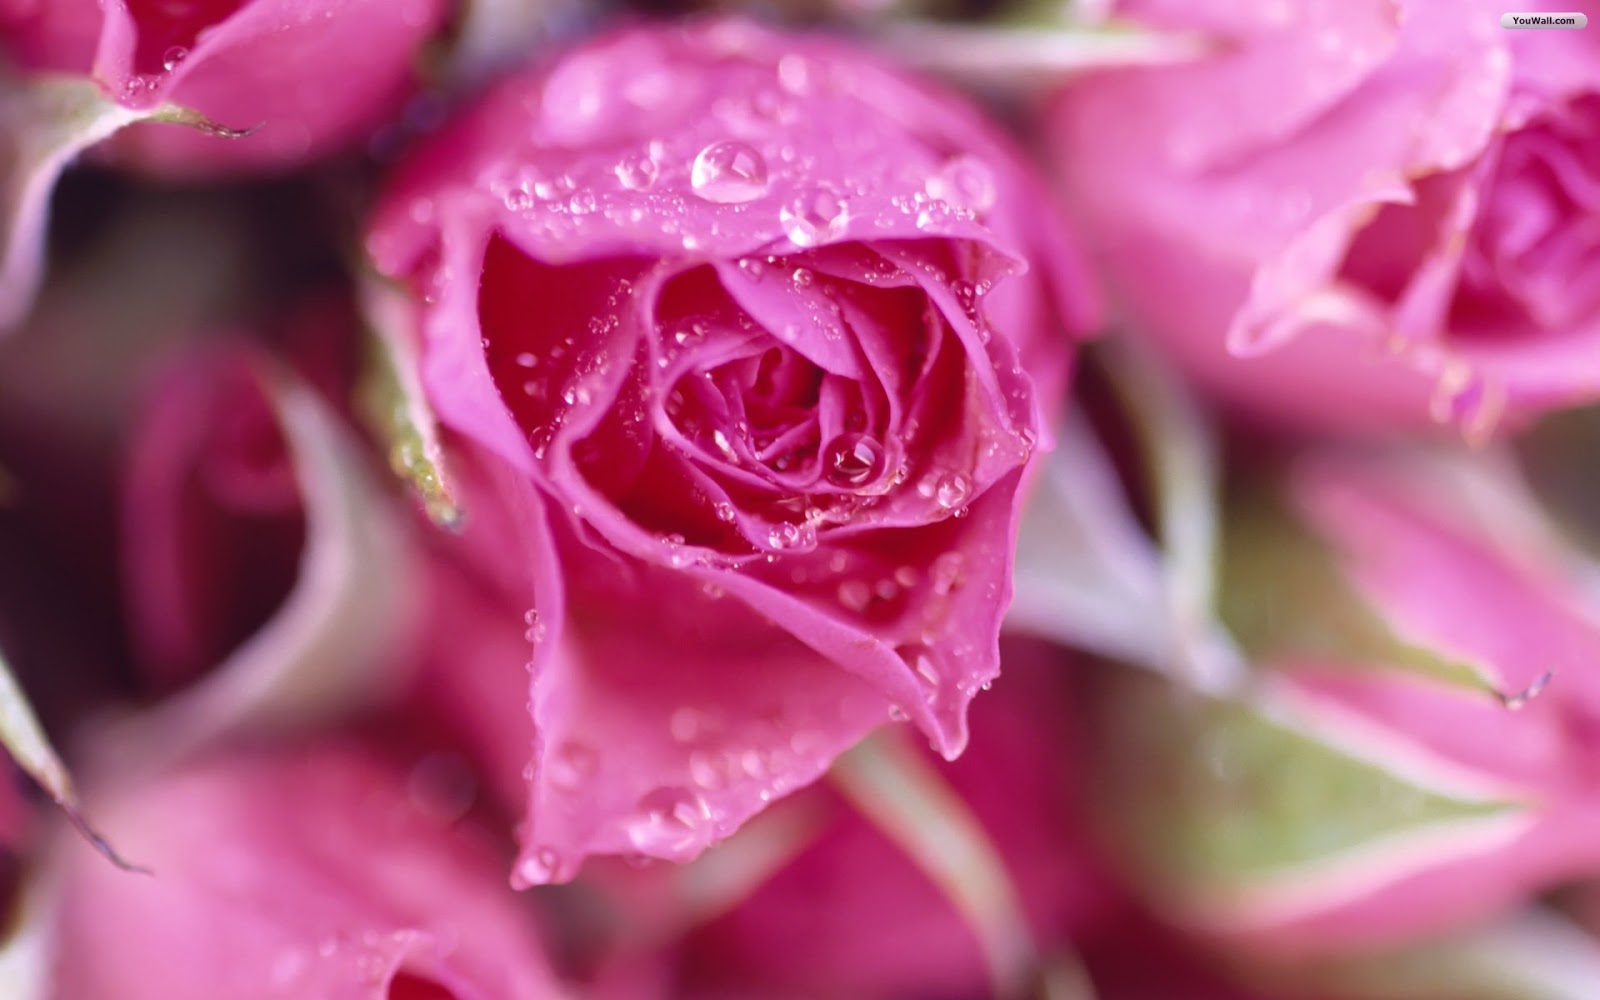 beautiful pictures of roses for wallpaper,flower,garden roses,flowering plant,pink,petal